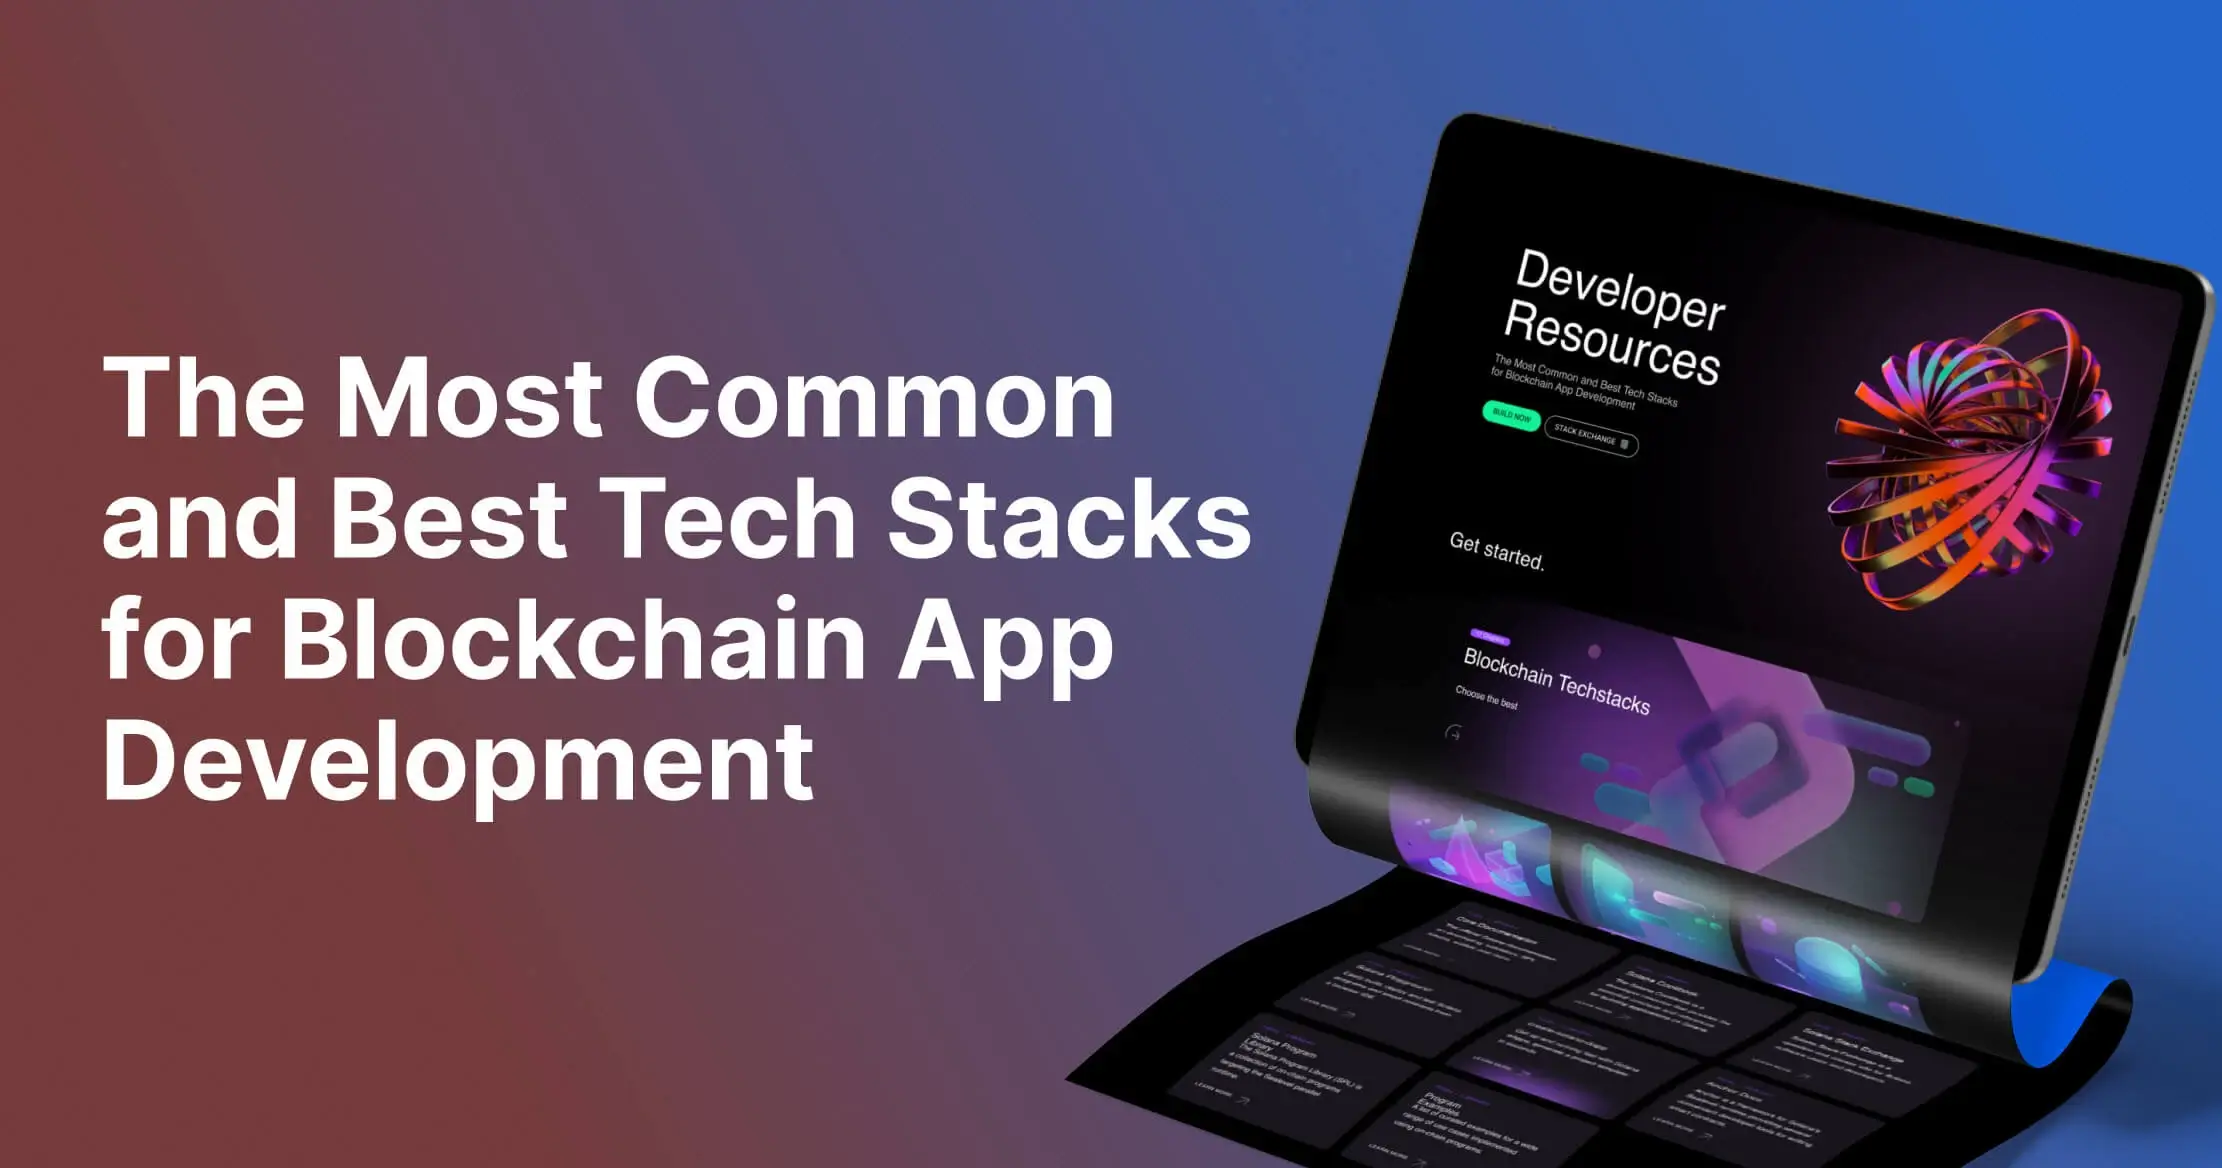 The Most Common and Best Tech Stacks for Blockchain App Development